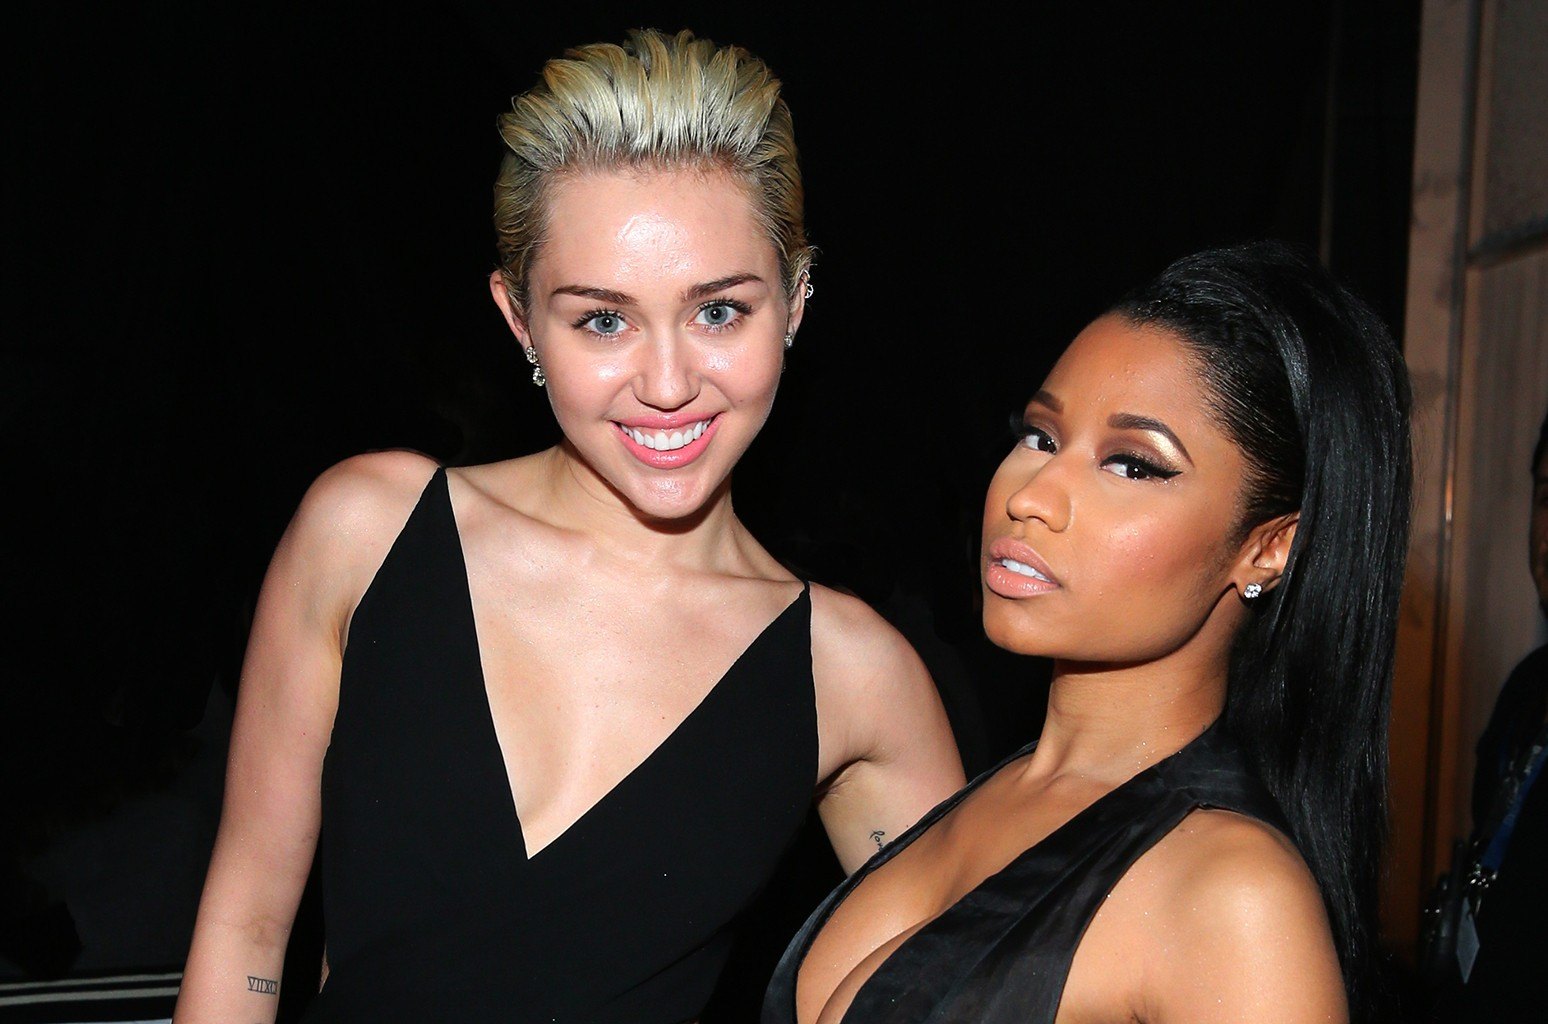 Check Out these Crazy Celebrity Feuds